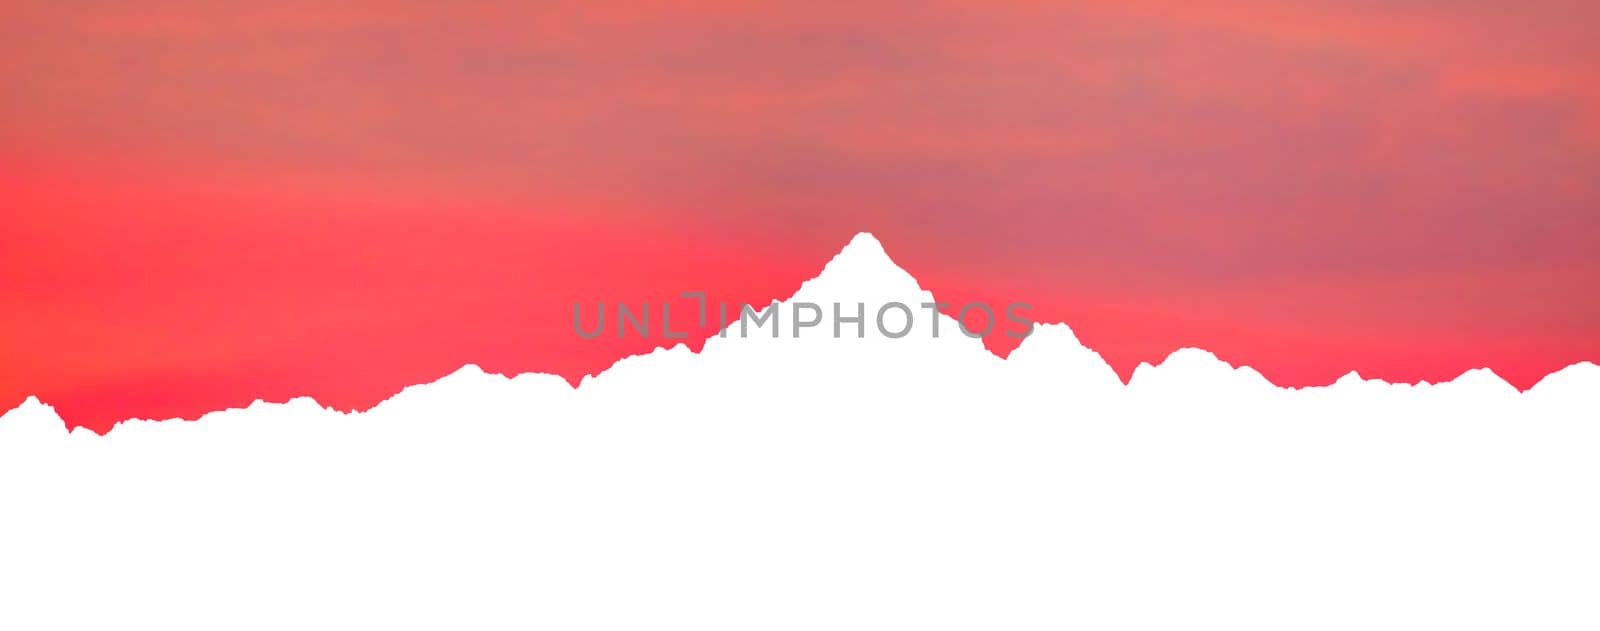 Skyline of Monviso mountains, the highest mountain of the Cottian Alps in Piedmont, Italy